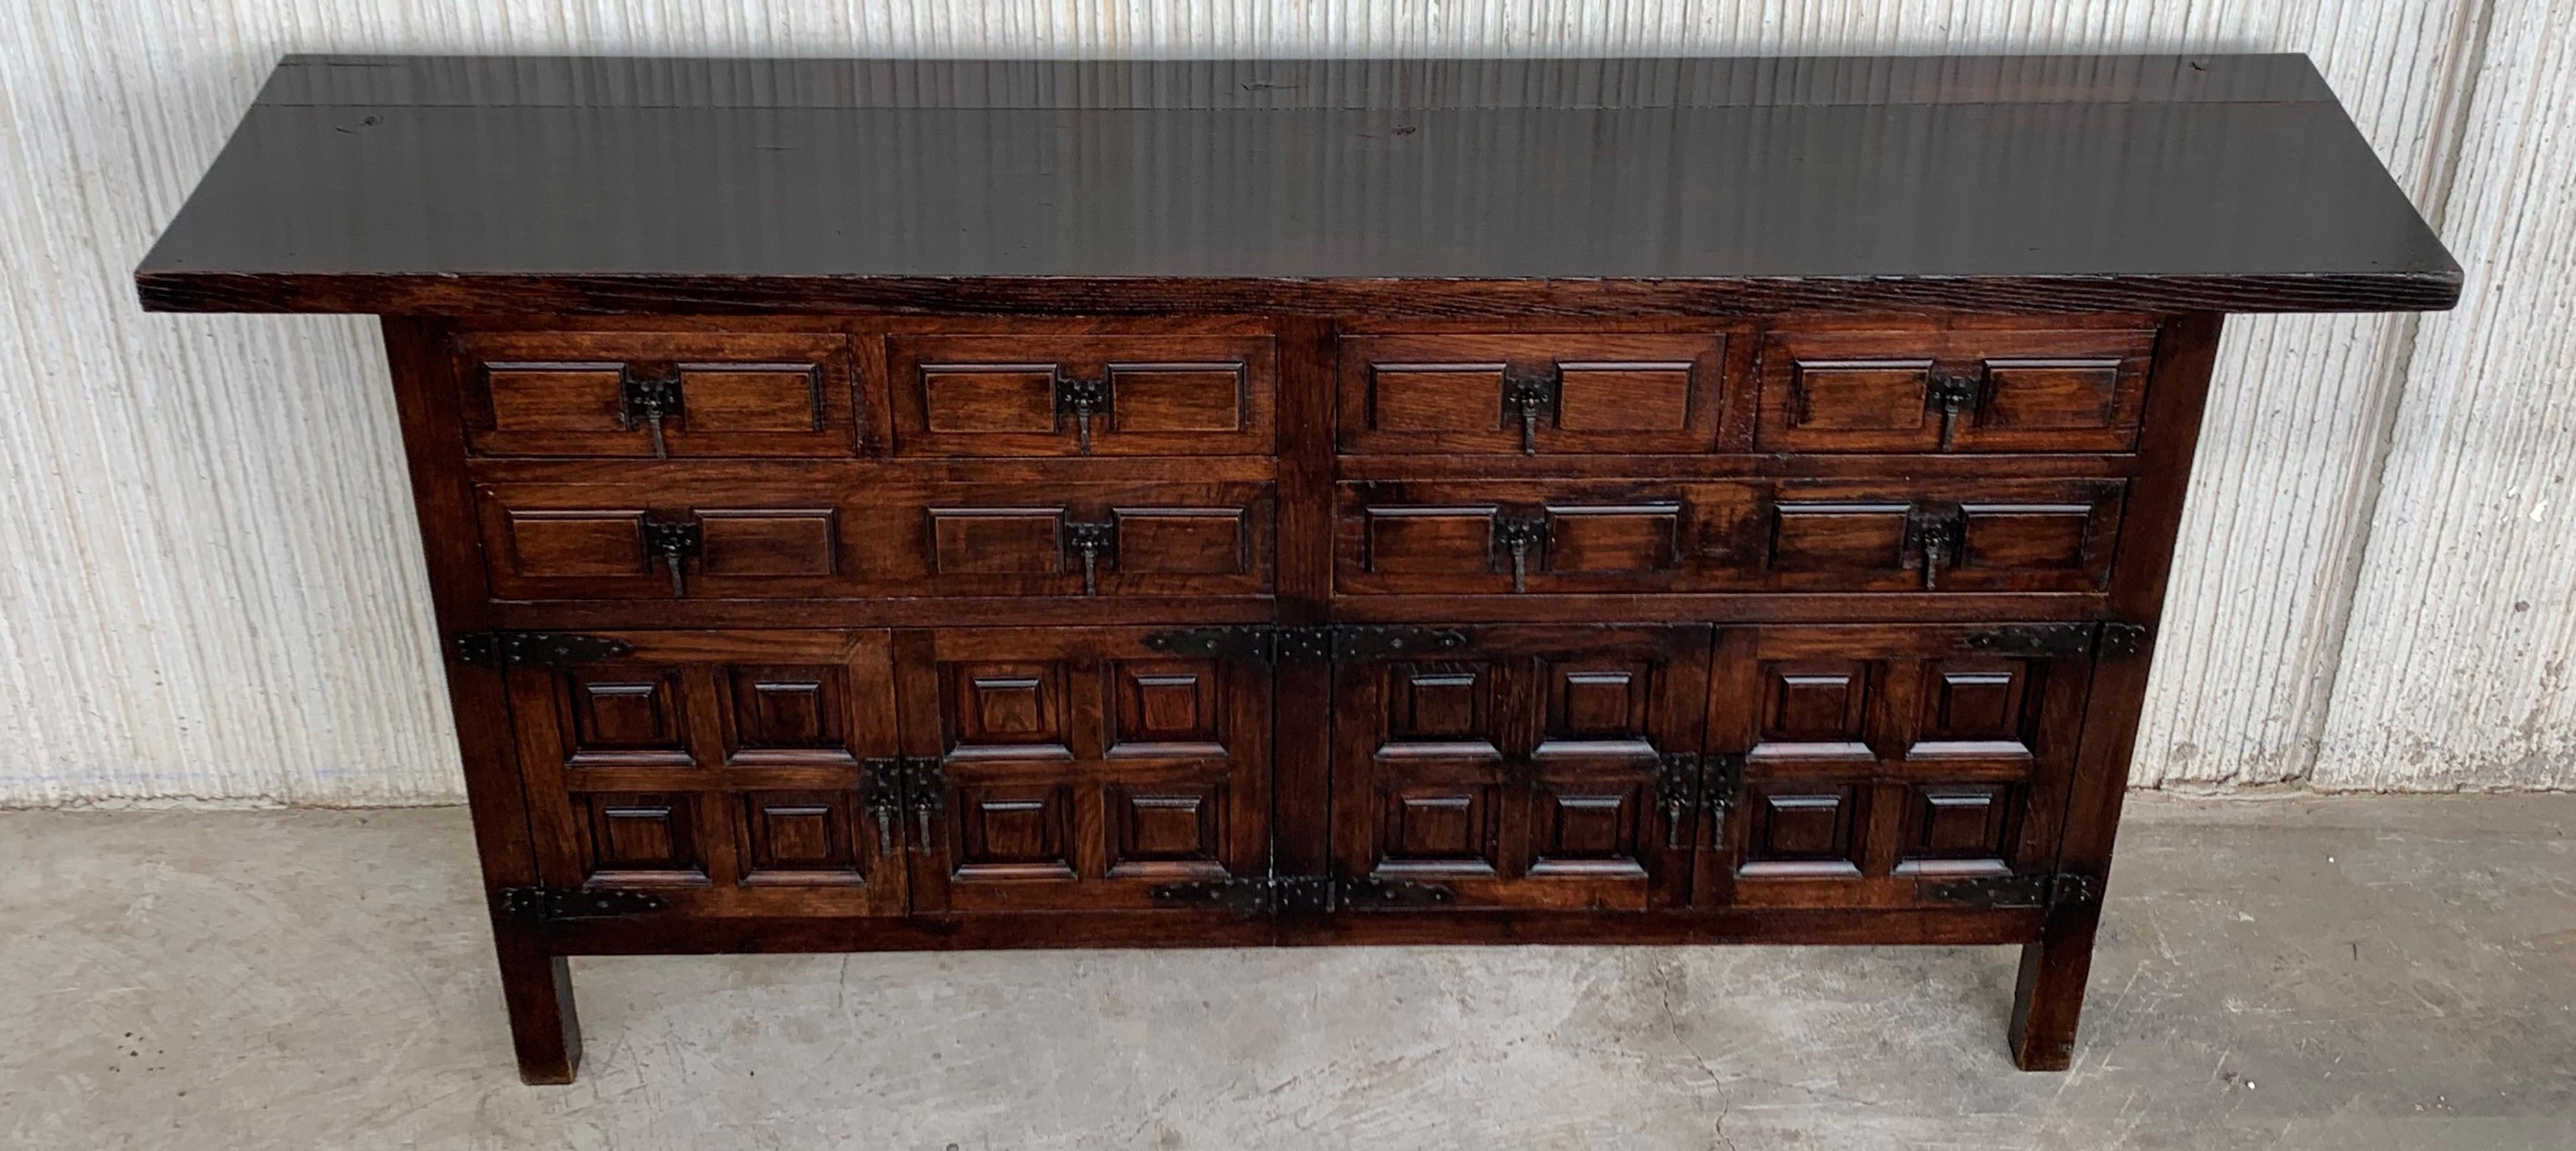 Catalan Spanish Baroque Carved Walnut Tuscan Six Drawers Credenza or Buffet 1